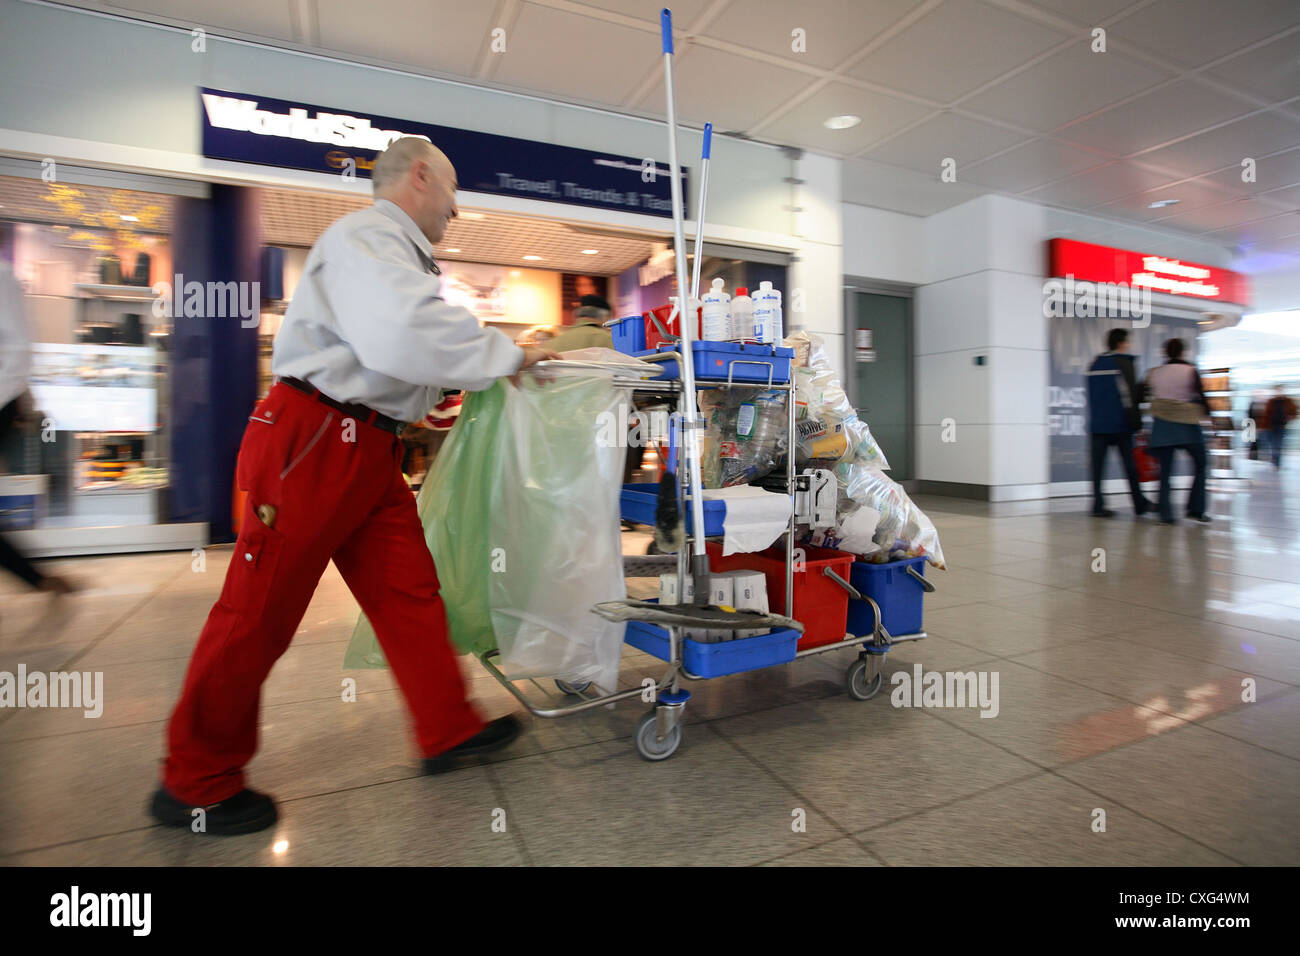 Muenchen, cleaning staff at work in the airport, Franz Josef Strauss Stock Photo